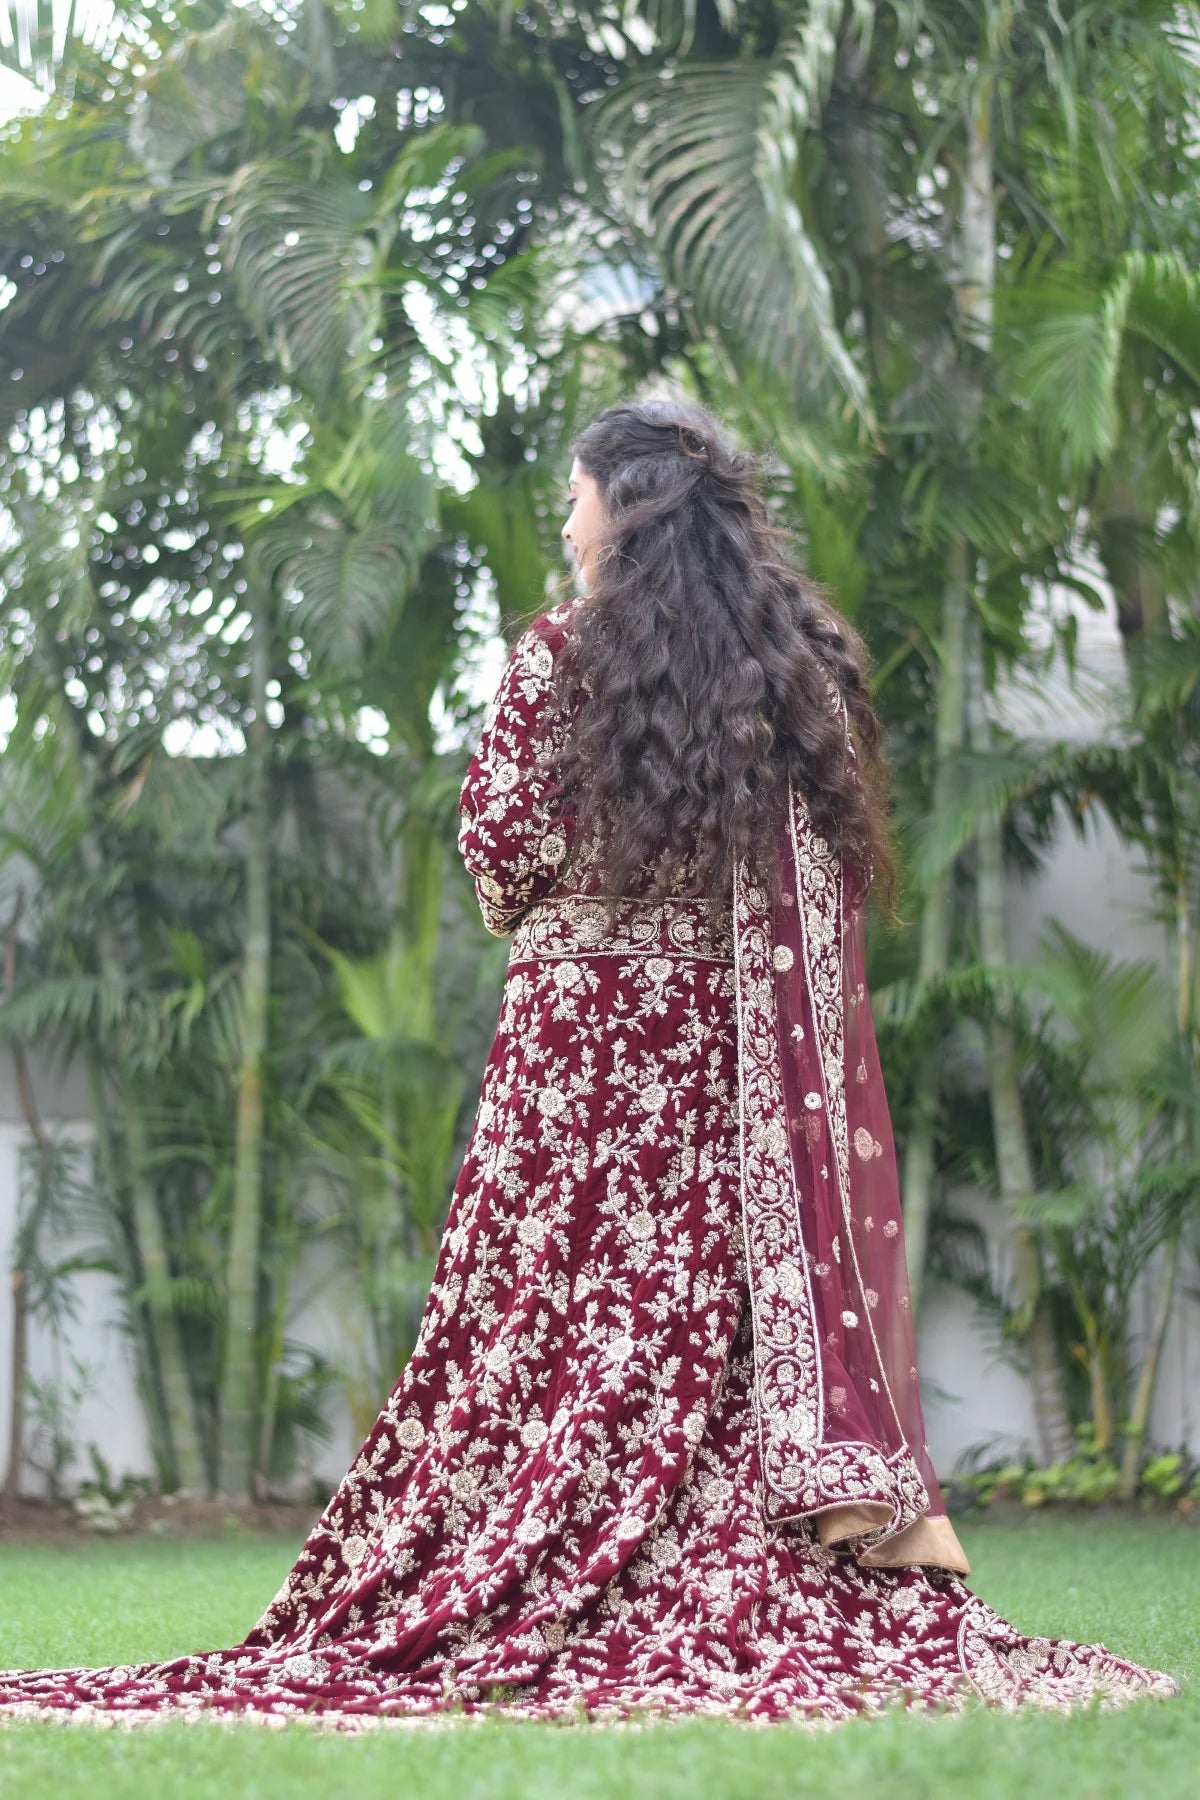 An Indian woman looks stunning in a maroon Trail Gown, complete with delicate embellishments and flowing fabric.